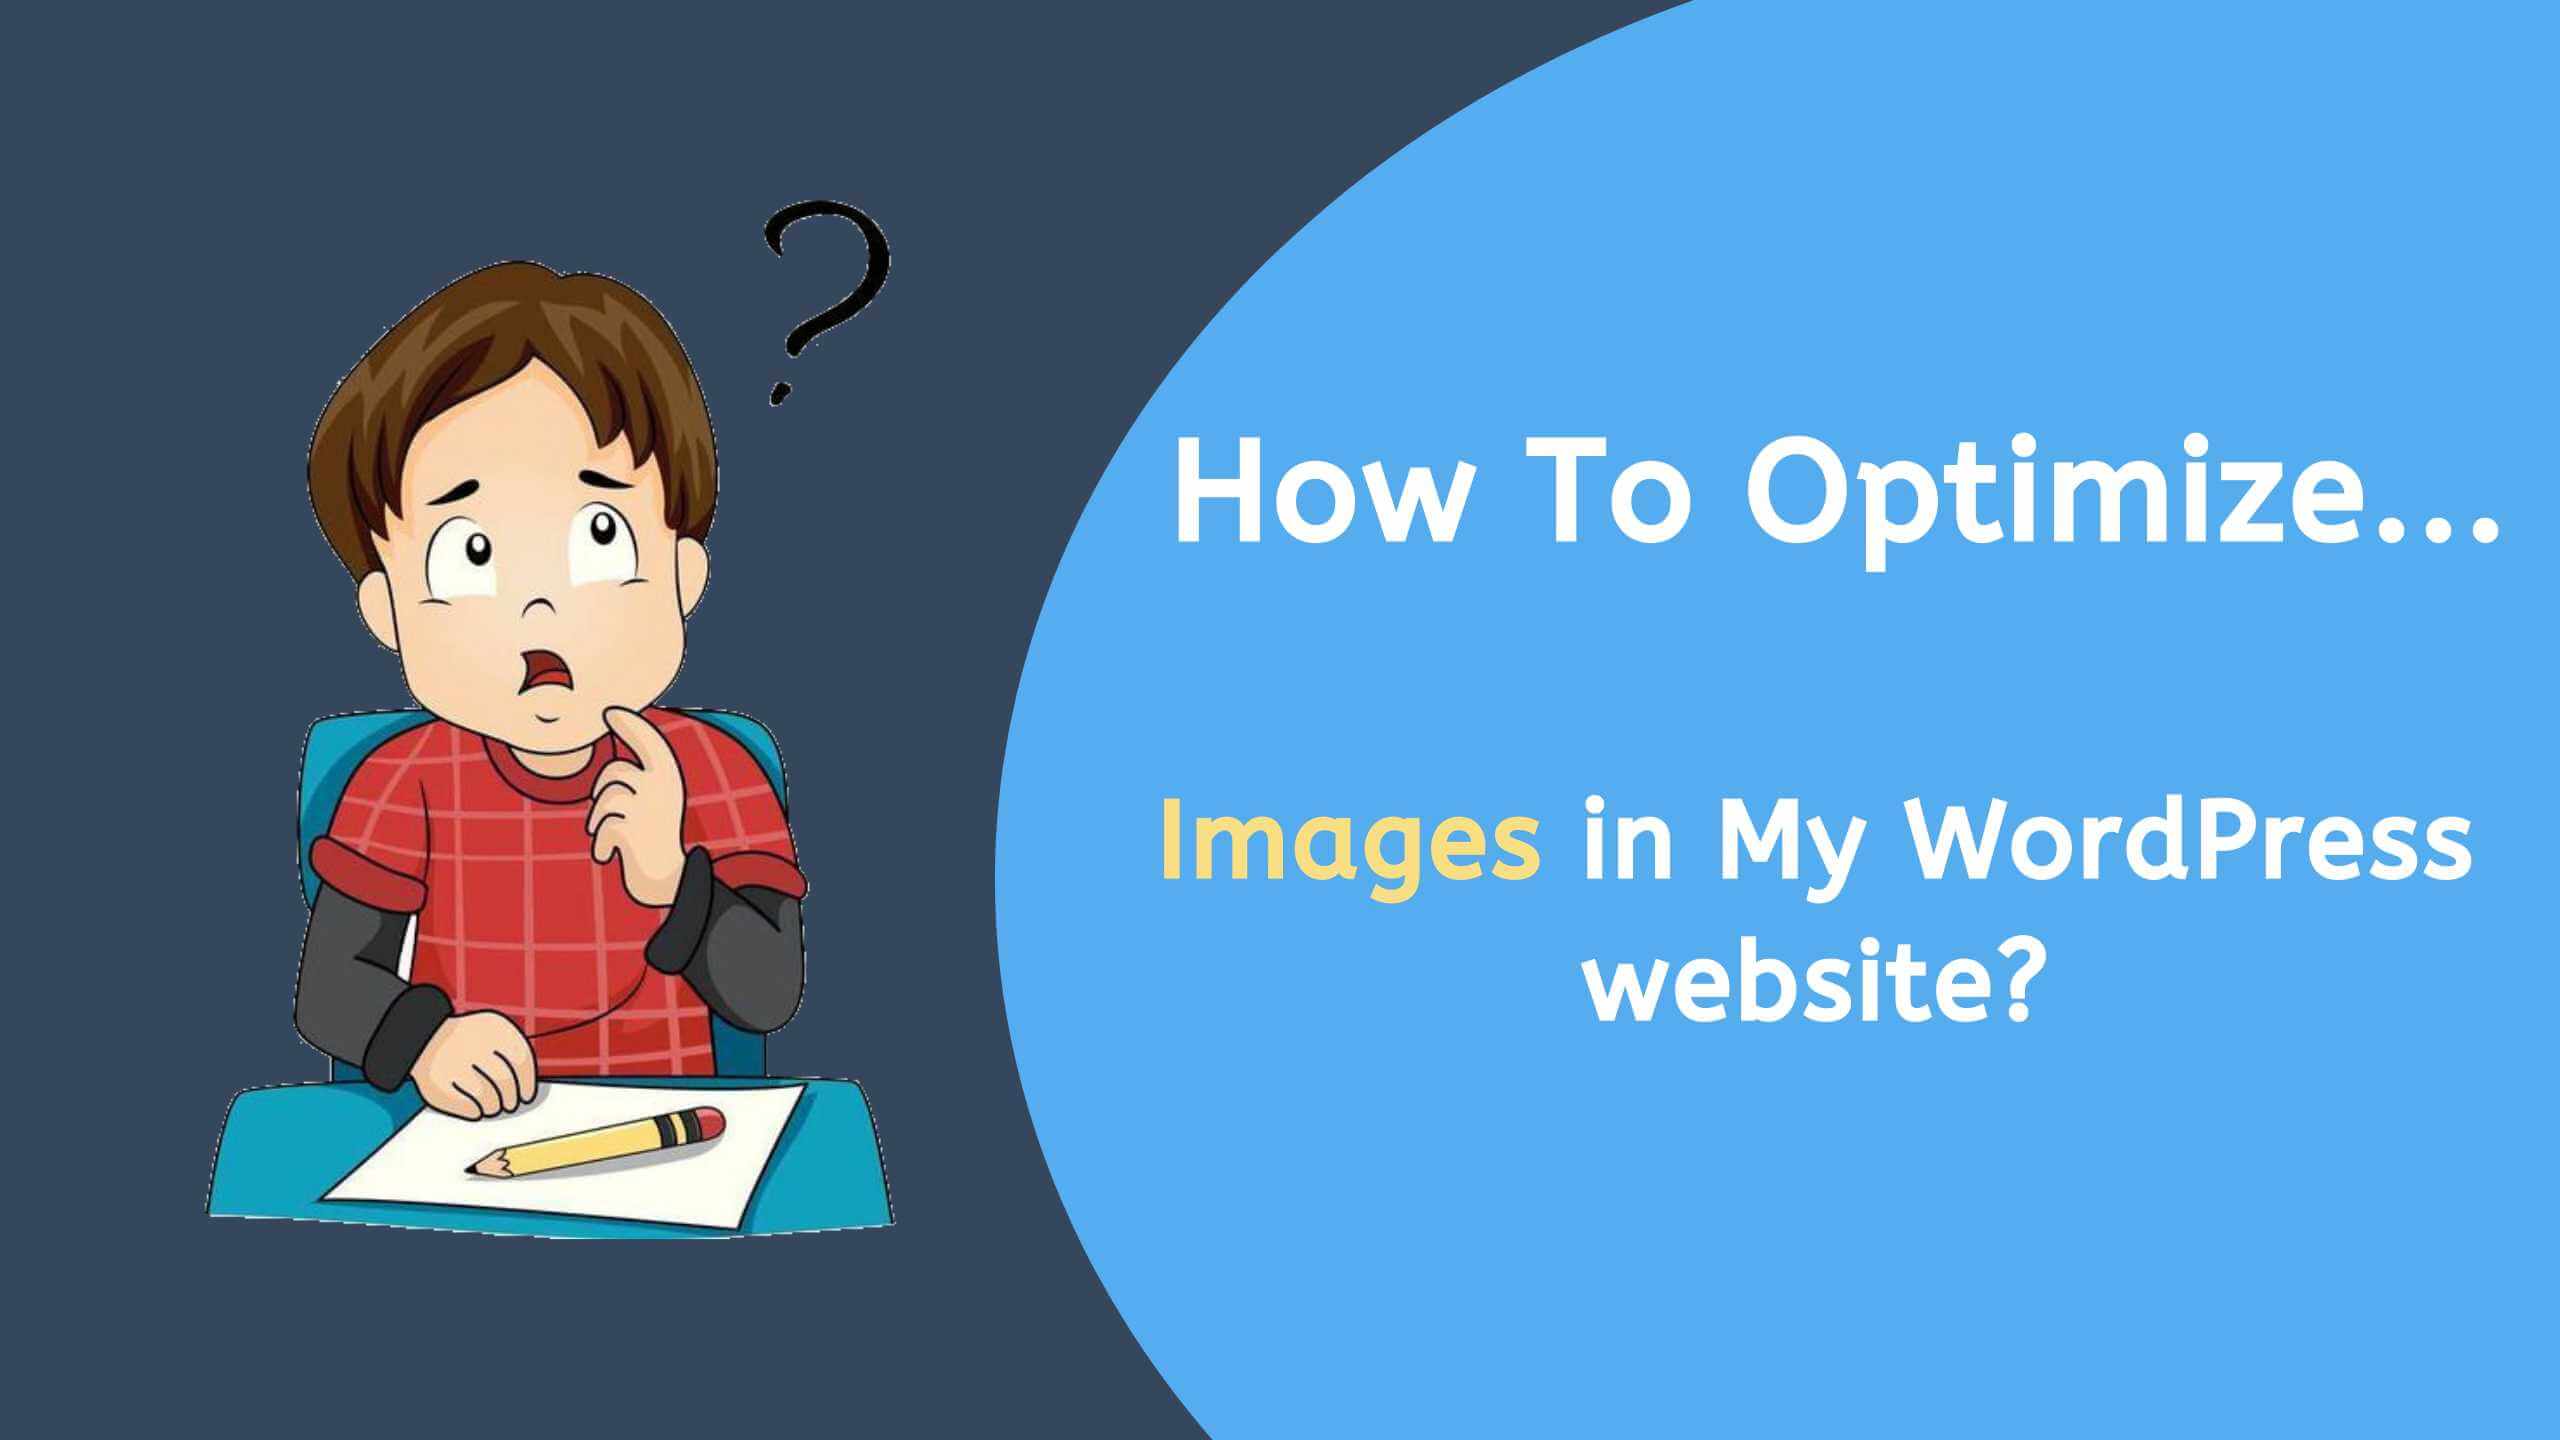 but, how to optimize images in wordpress?